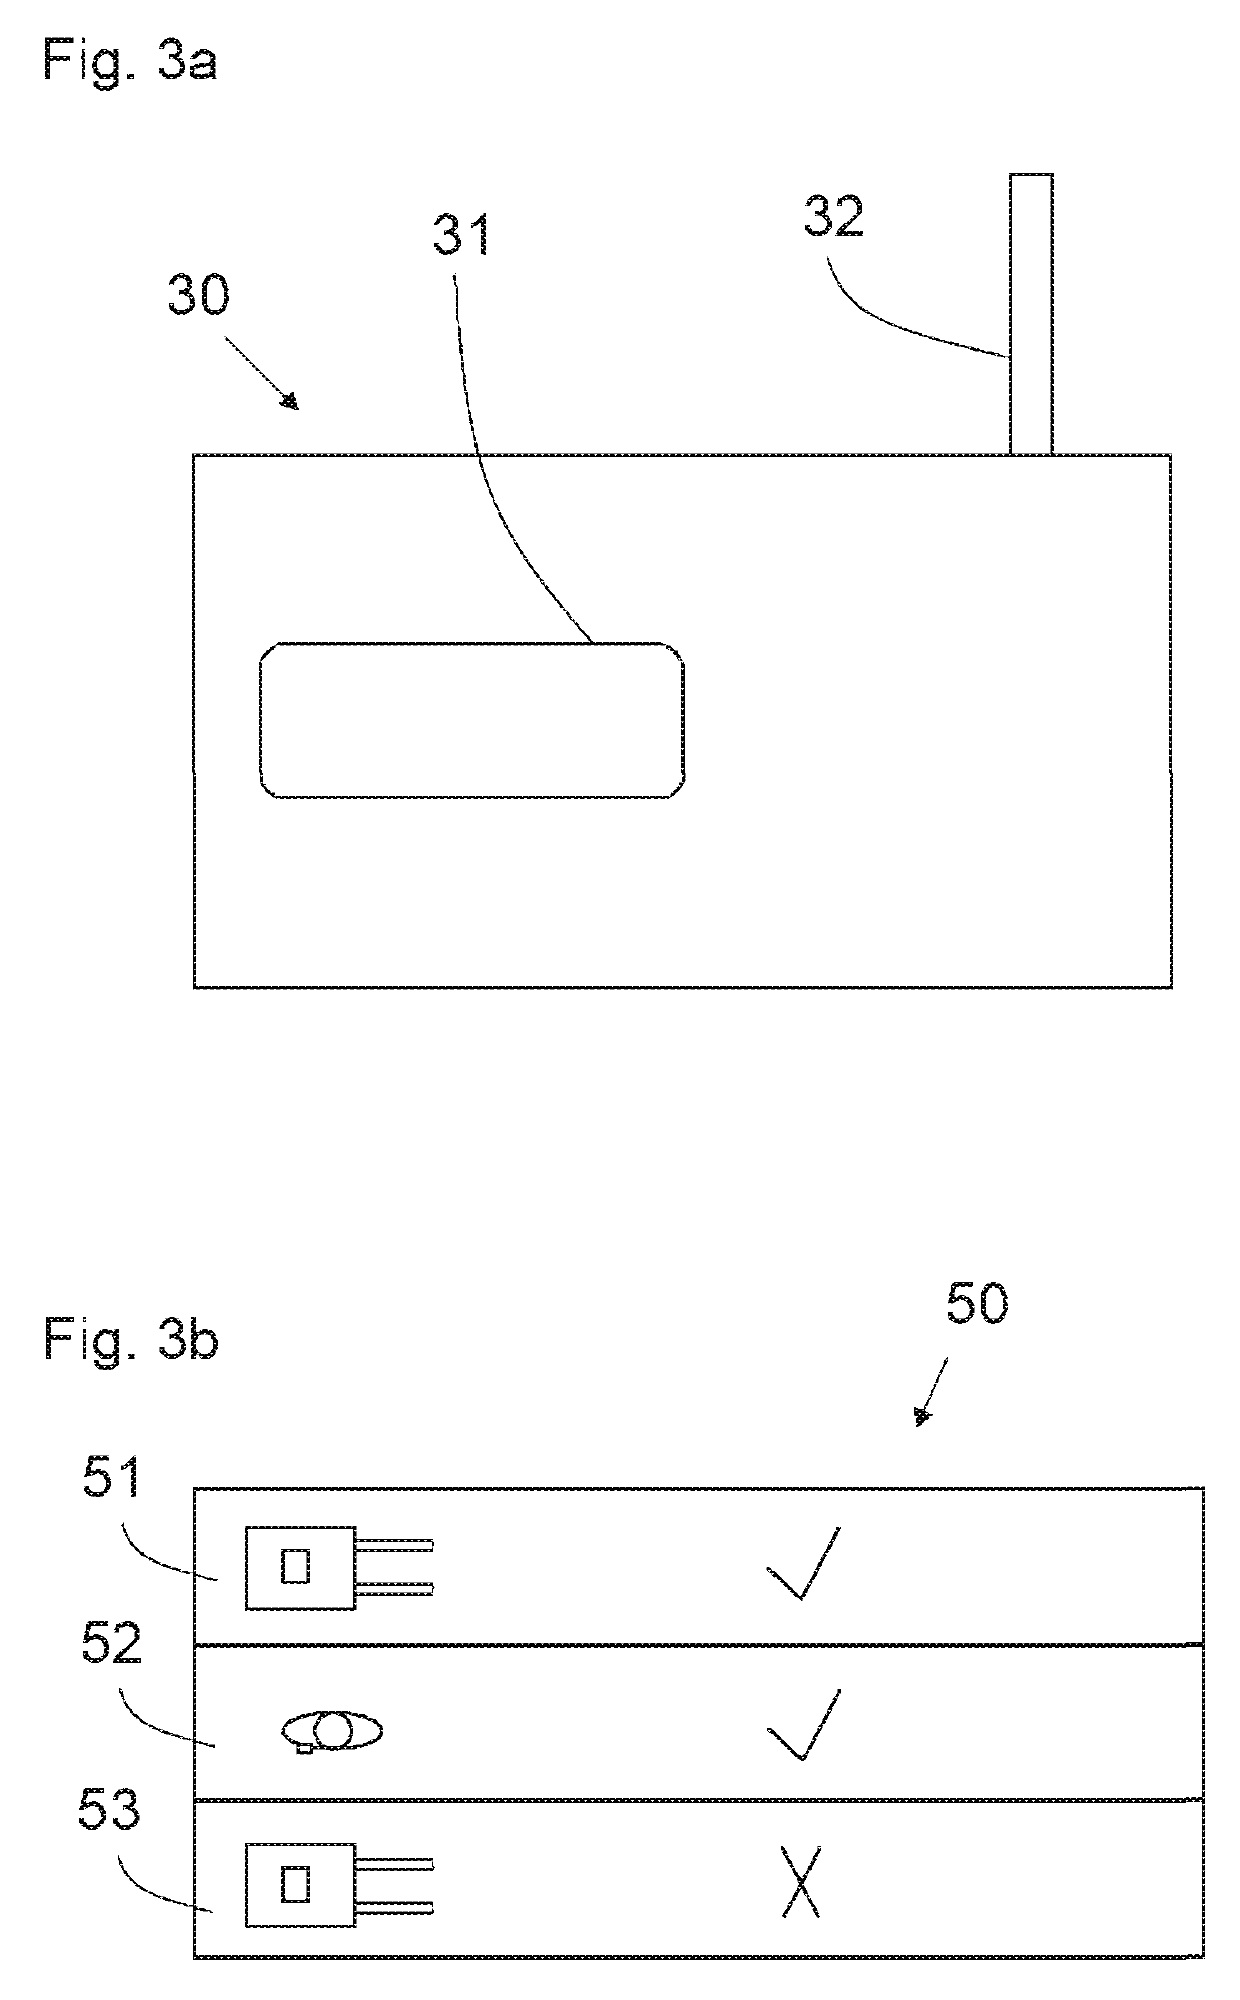 Method and system for collision avoidance in one hazardous area of a goods logistics facility